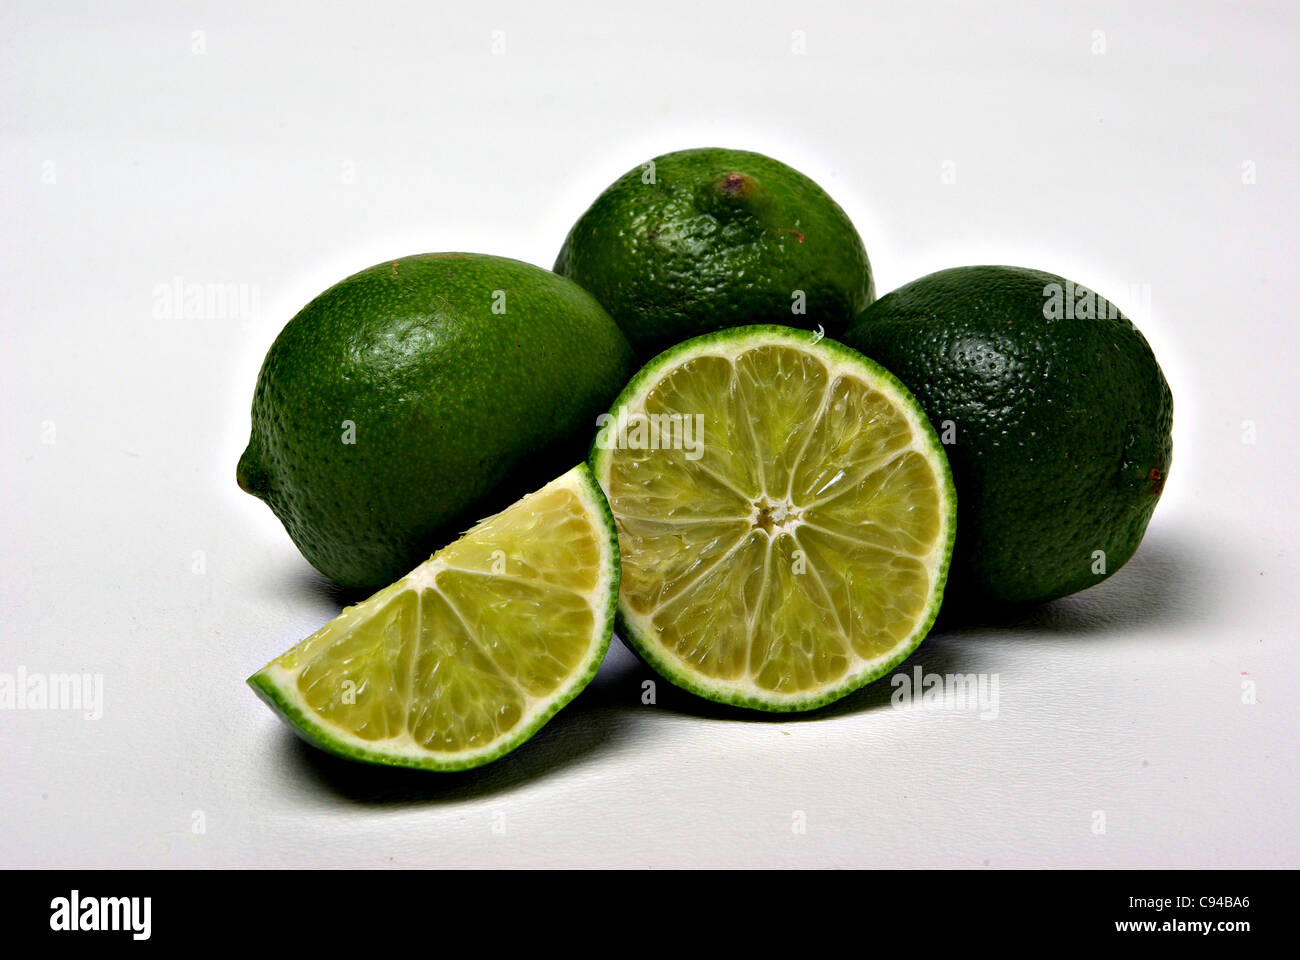 Limes and pieces of limes sit on a plain background. Stock Photo